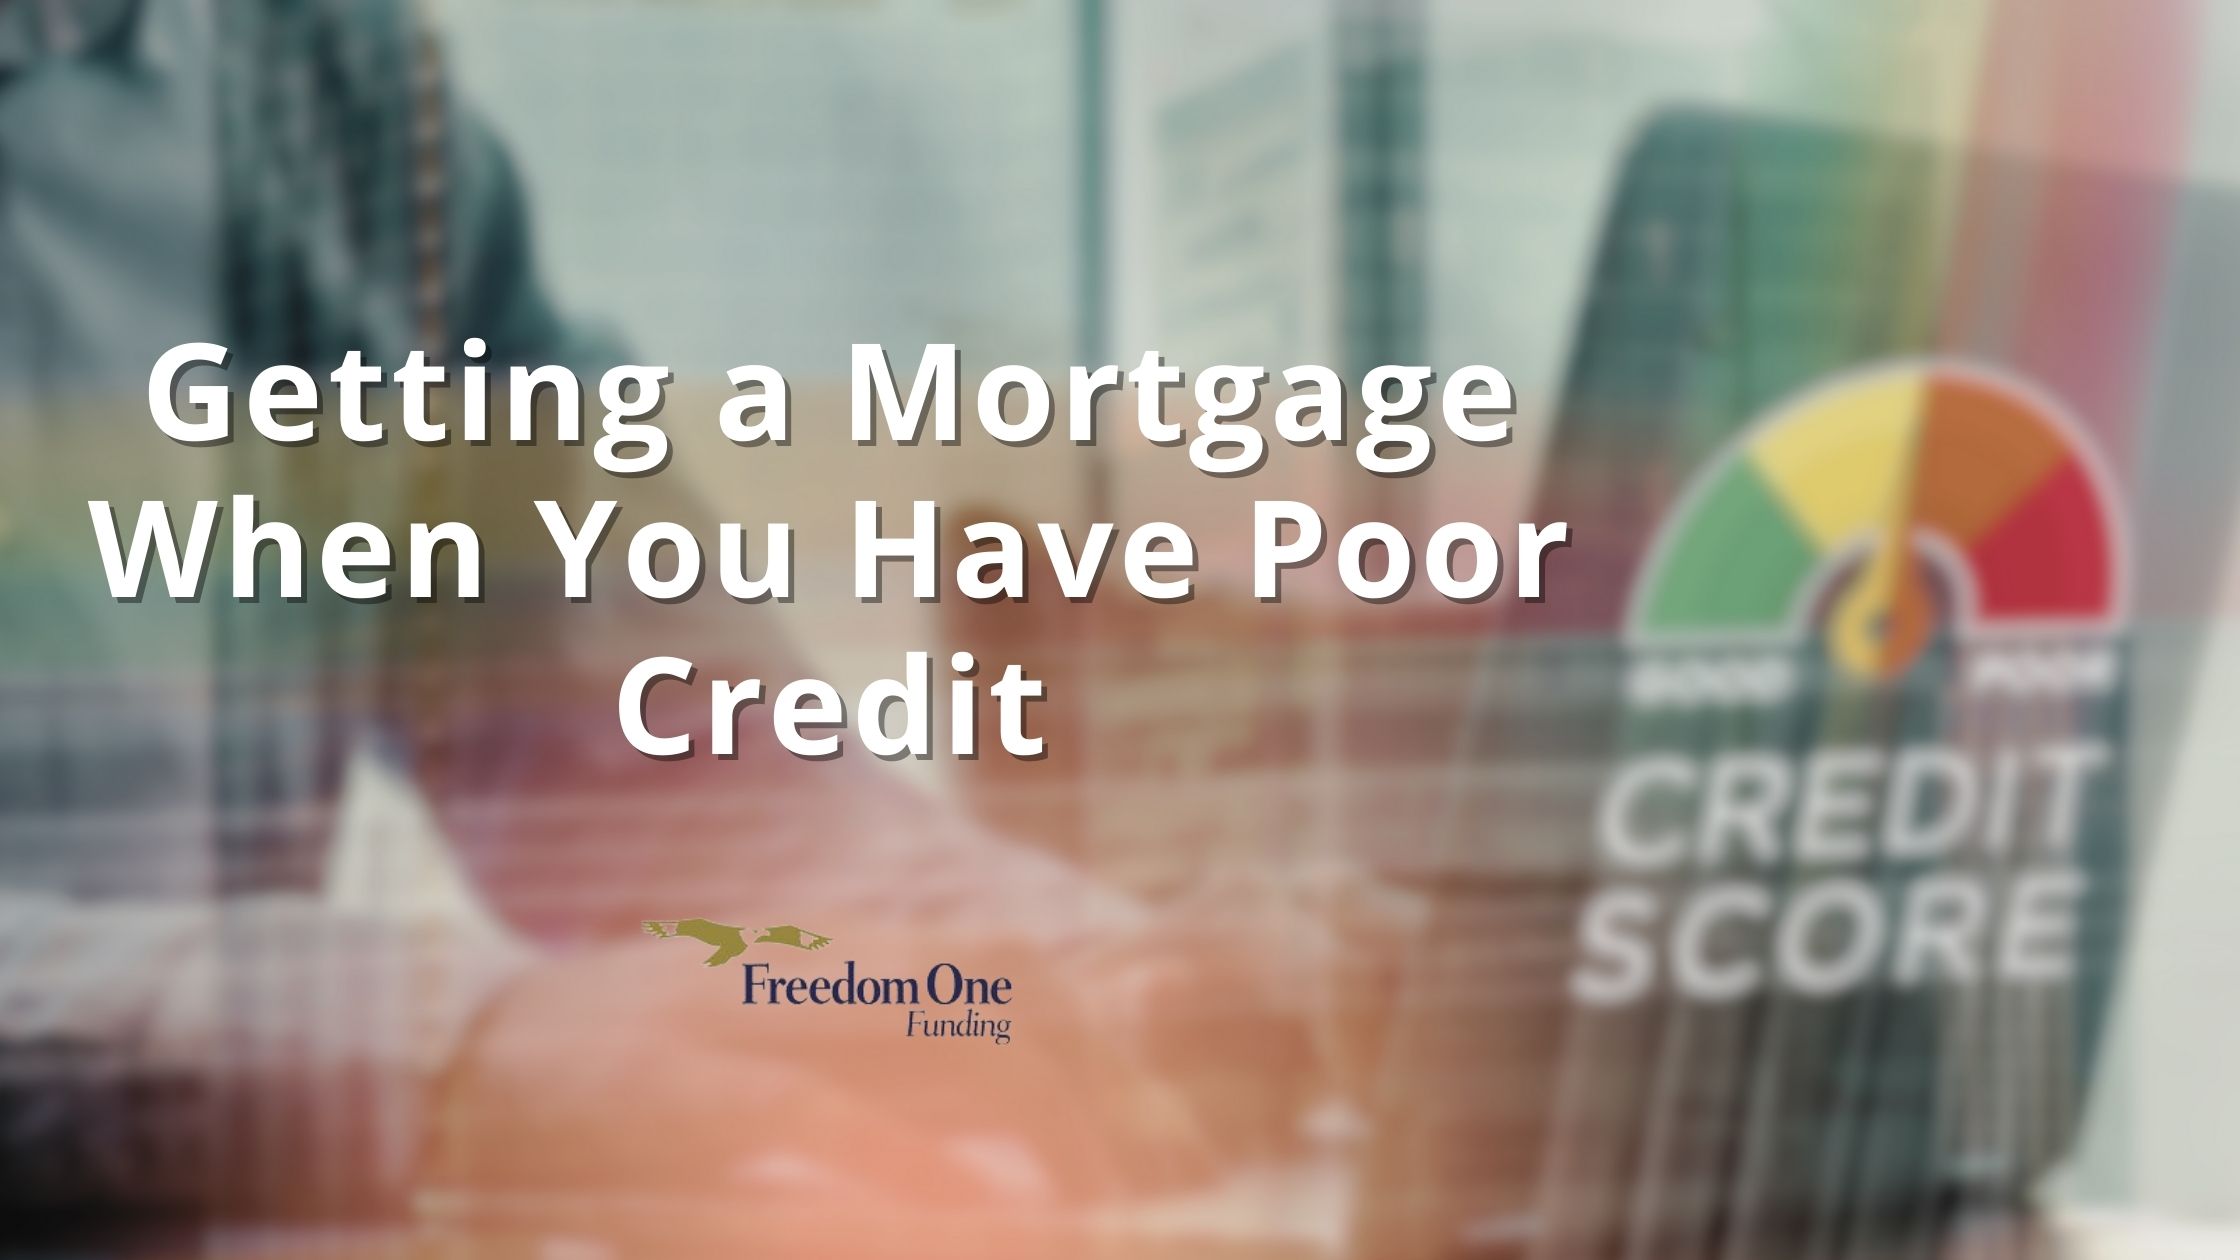 Getting a Mortgage When You Have Poor Credit